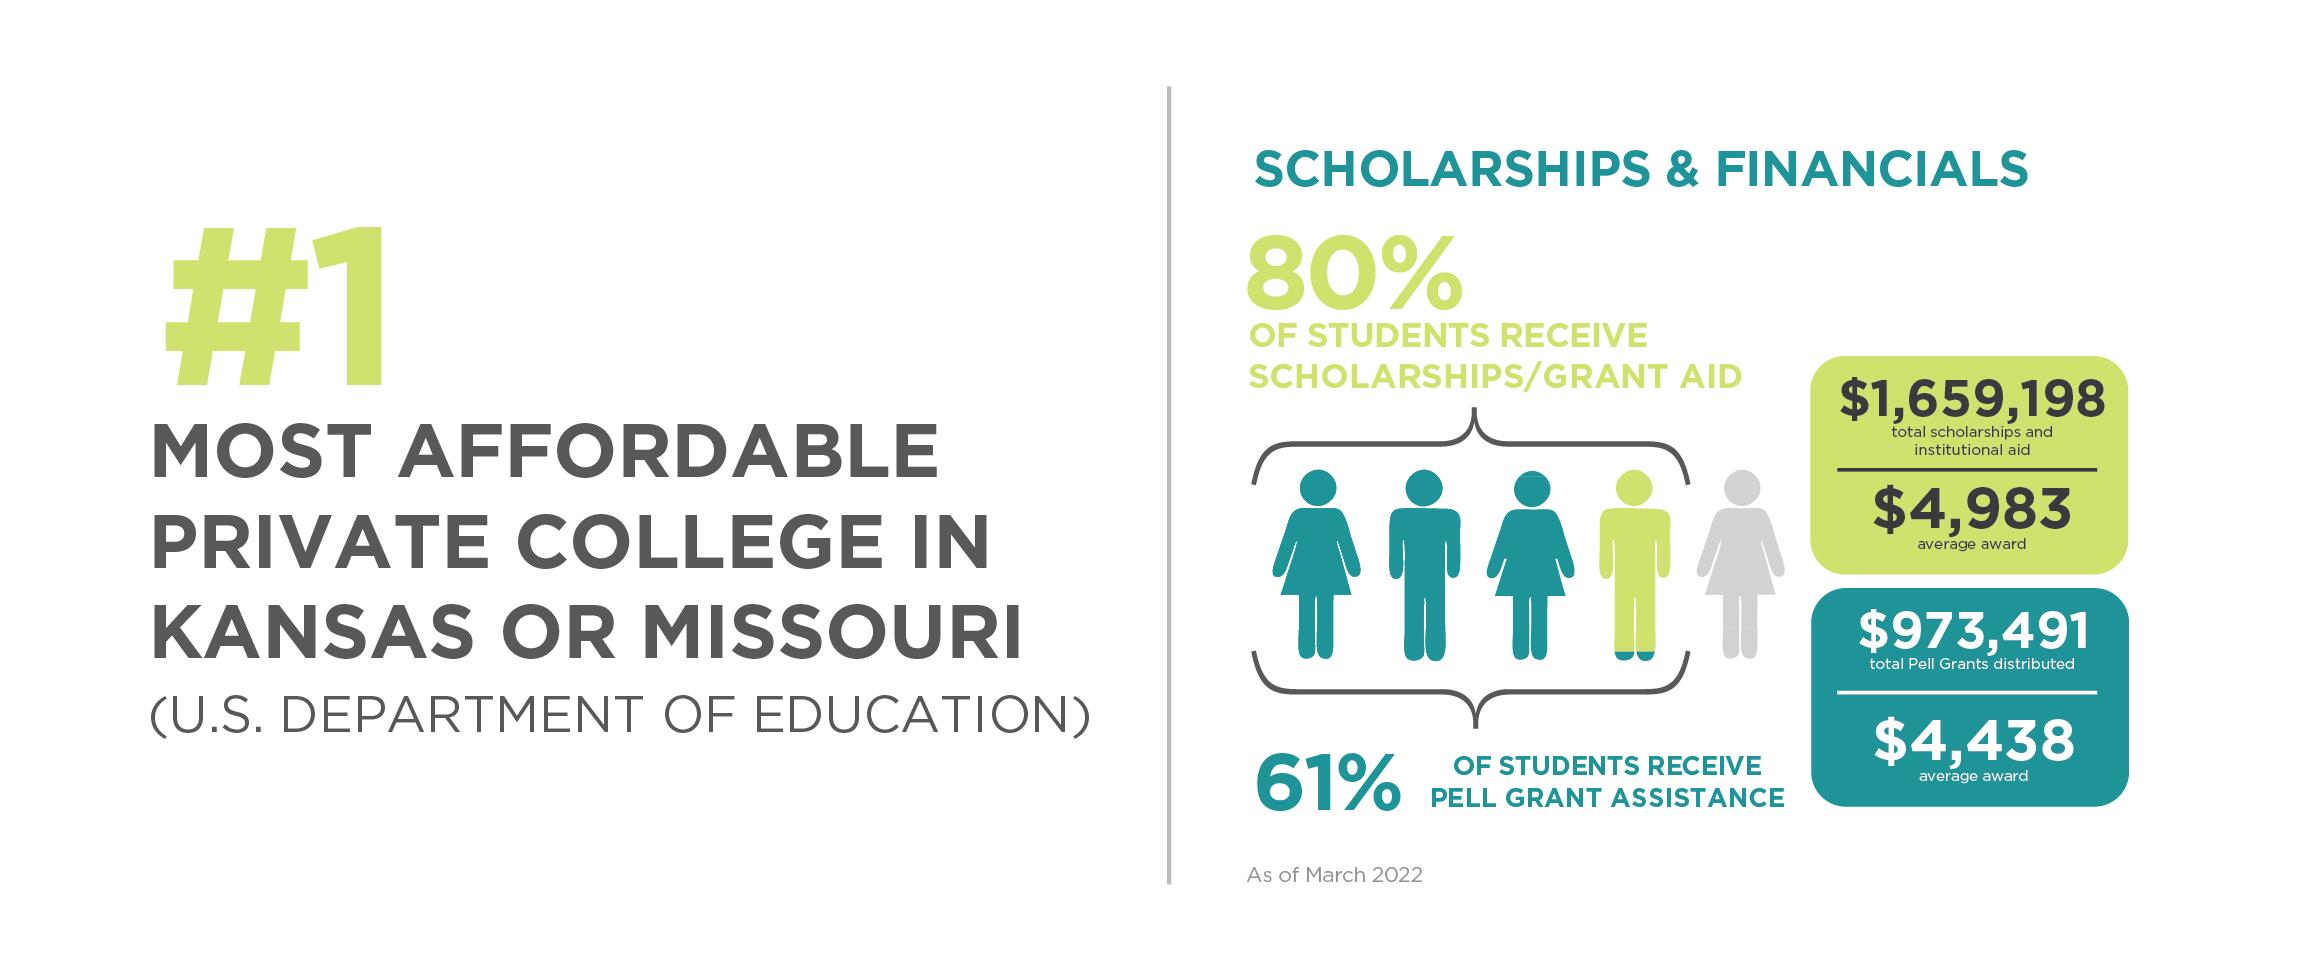 Graphic that shows Donnelly College is the most affordable private college in kansas or missouri, and that most of our students get financial aid and scholarships. Admissions at Donnelly can help you become a student at Donnelly College in Kansas City Kansas and pursue a higher education that is affordable, diverse, local and Catholic. Donnelly has associate degrees, transfer programs, bachelor's degrees in business leadership and information technology and nursing programs.